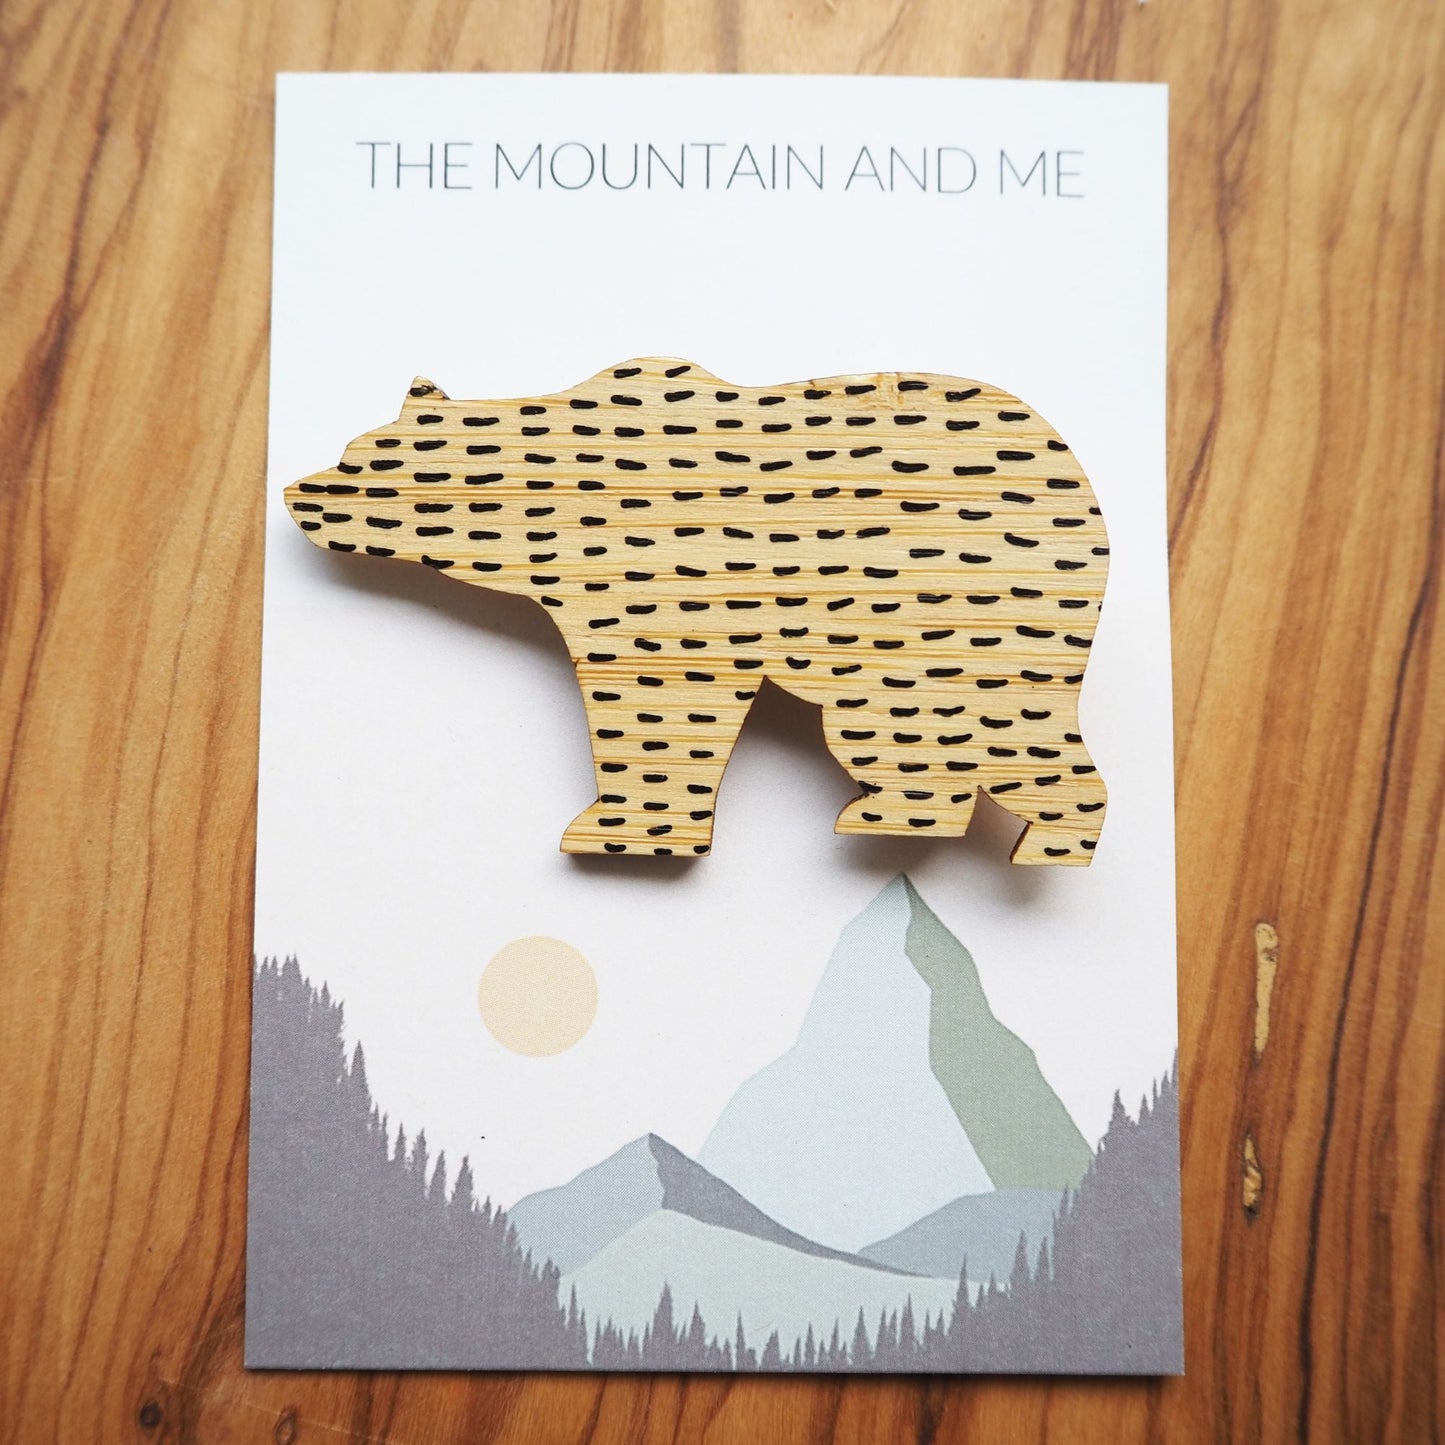 Bamboo bear brooch on the backing card that has The Mountain and Me branding and text. The bear has black short lines in a horizontal pattern all across it.